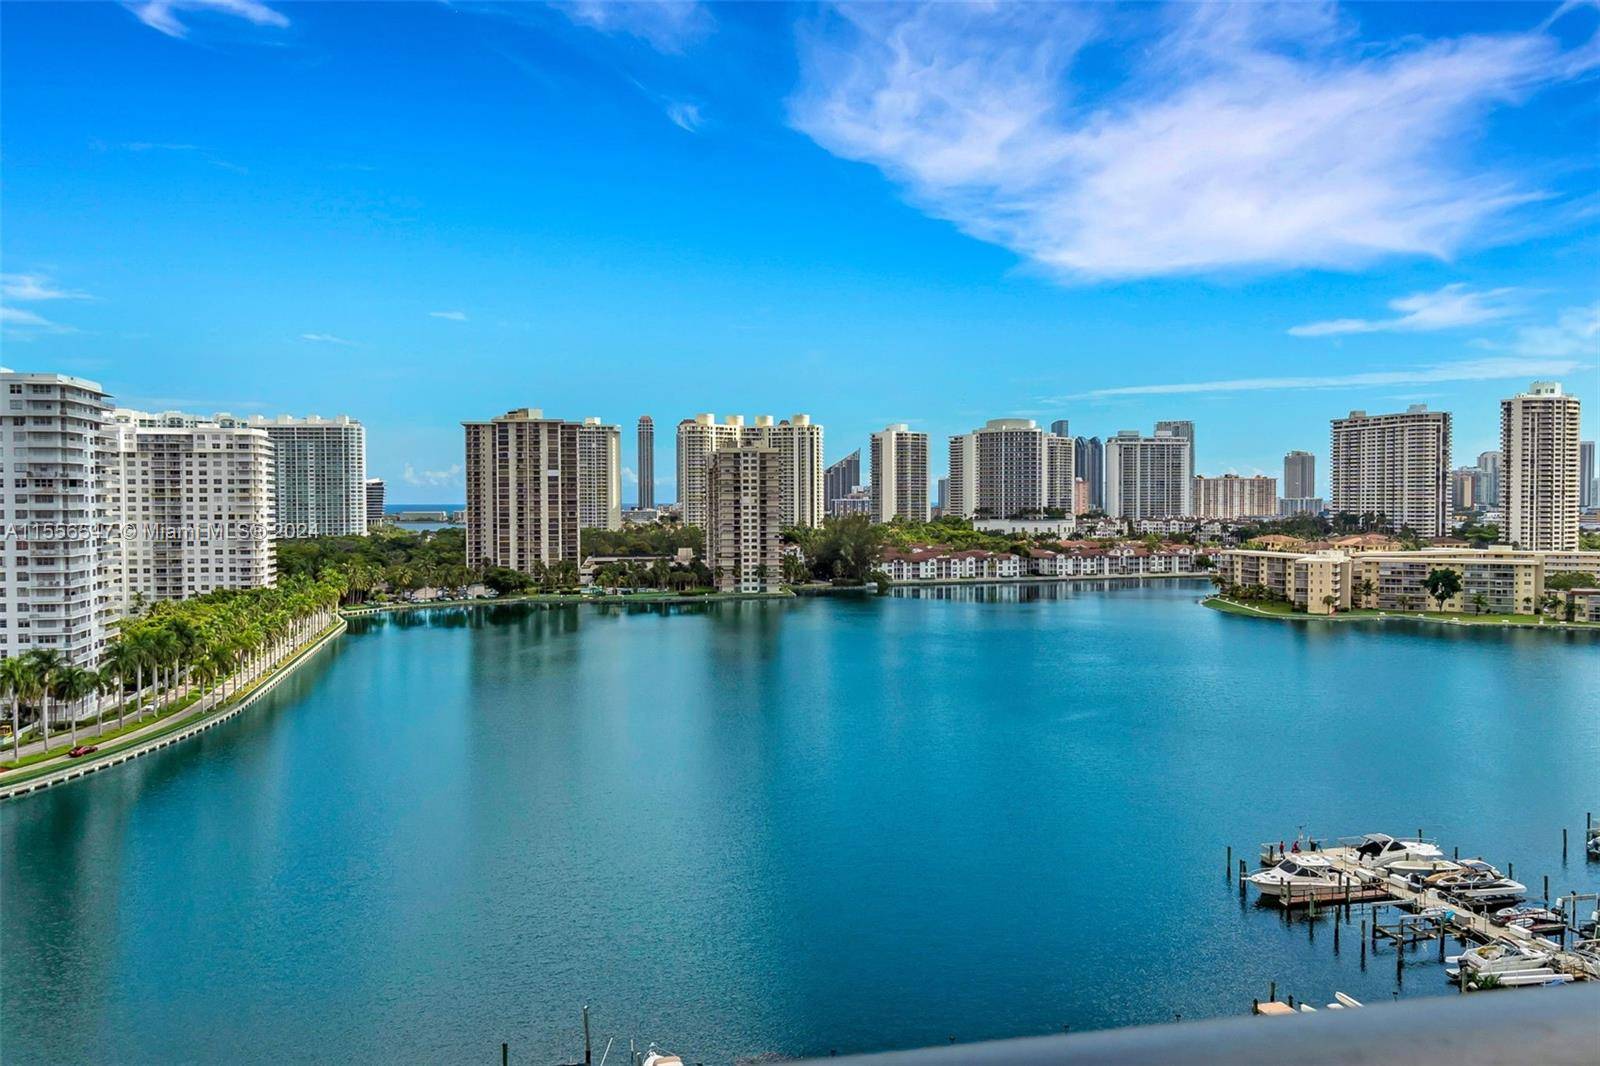 Experience the best of Aventura living in this inviting 2 bed, 2 bath condo, nestled in a prime location close to top rated schools, Aventura Mall, and beautiful beaches.